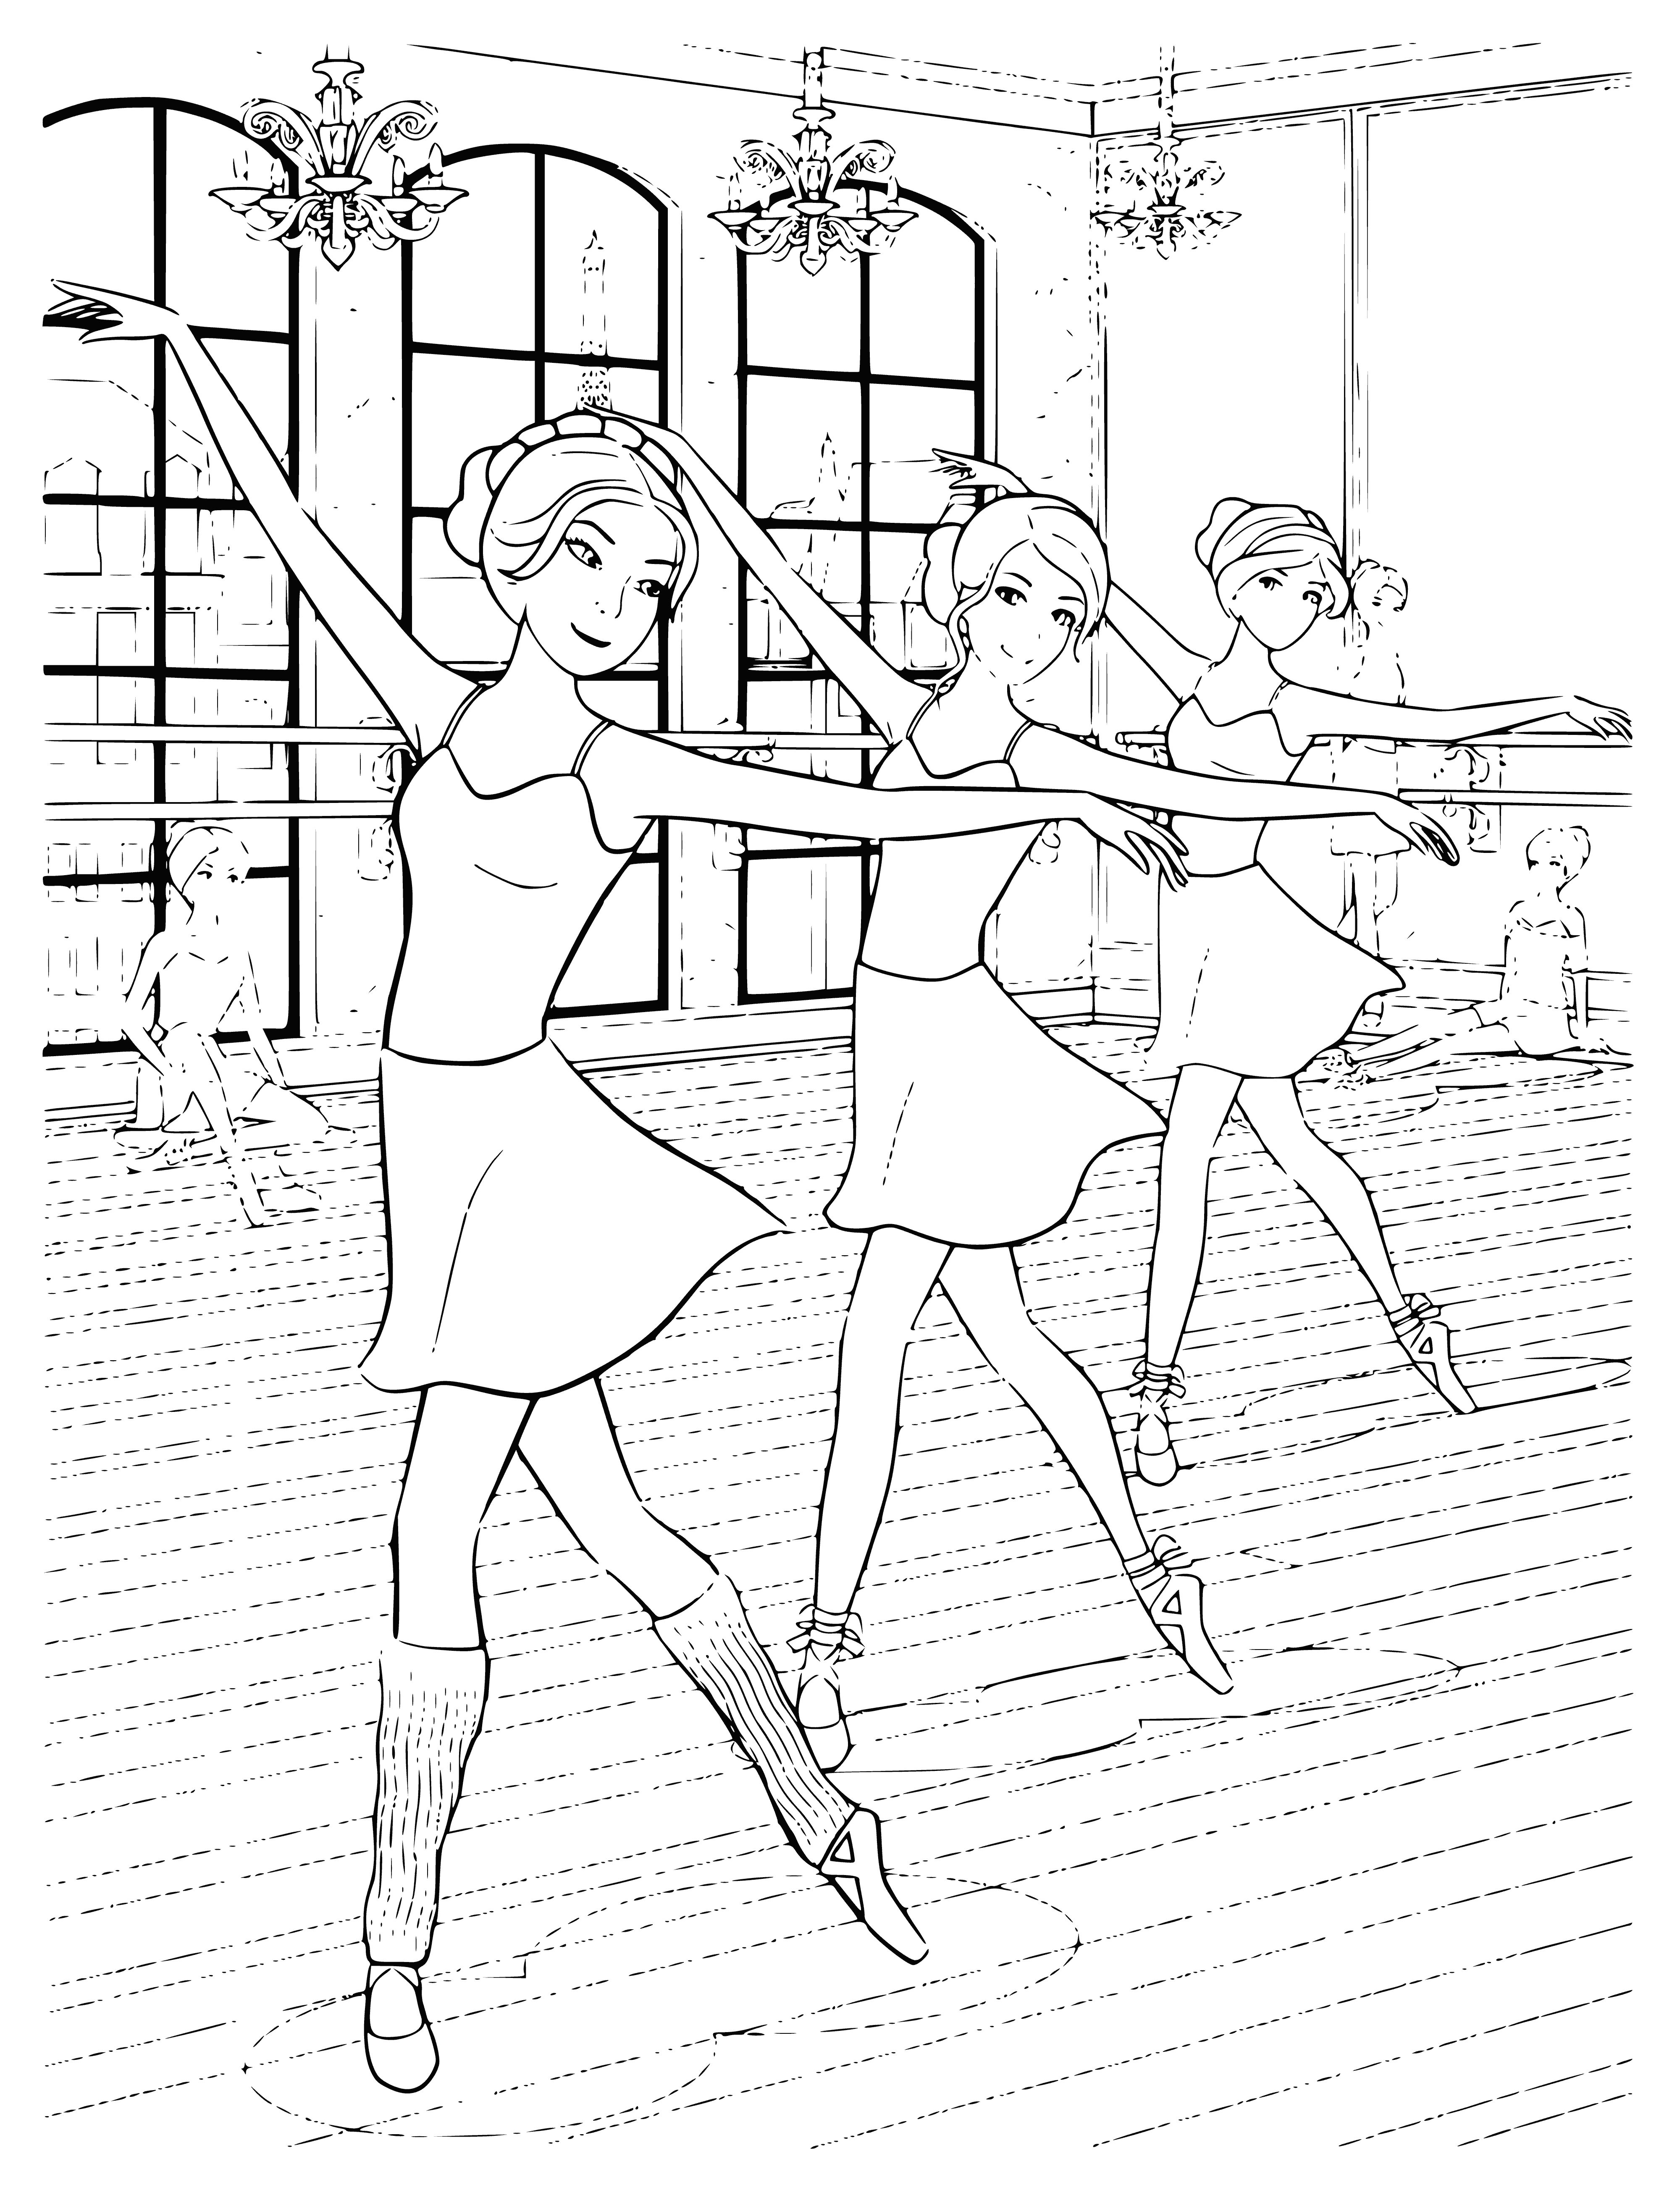 coloring page: Ten Barbie ballerinas at ballet rehearsal in pink tutus with different hair colors and standing in first position. #ballet #dolls